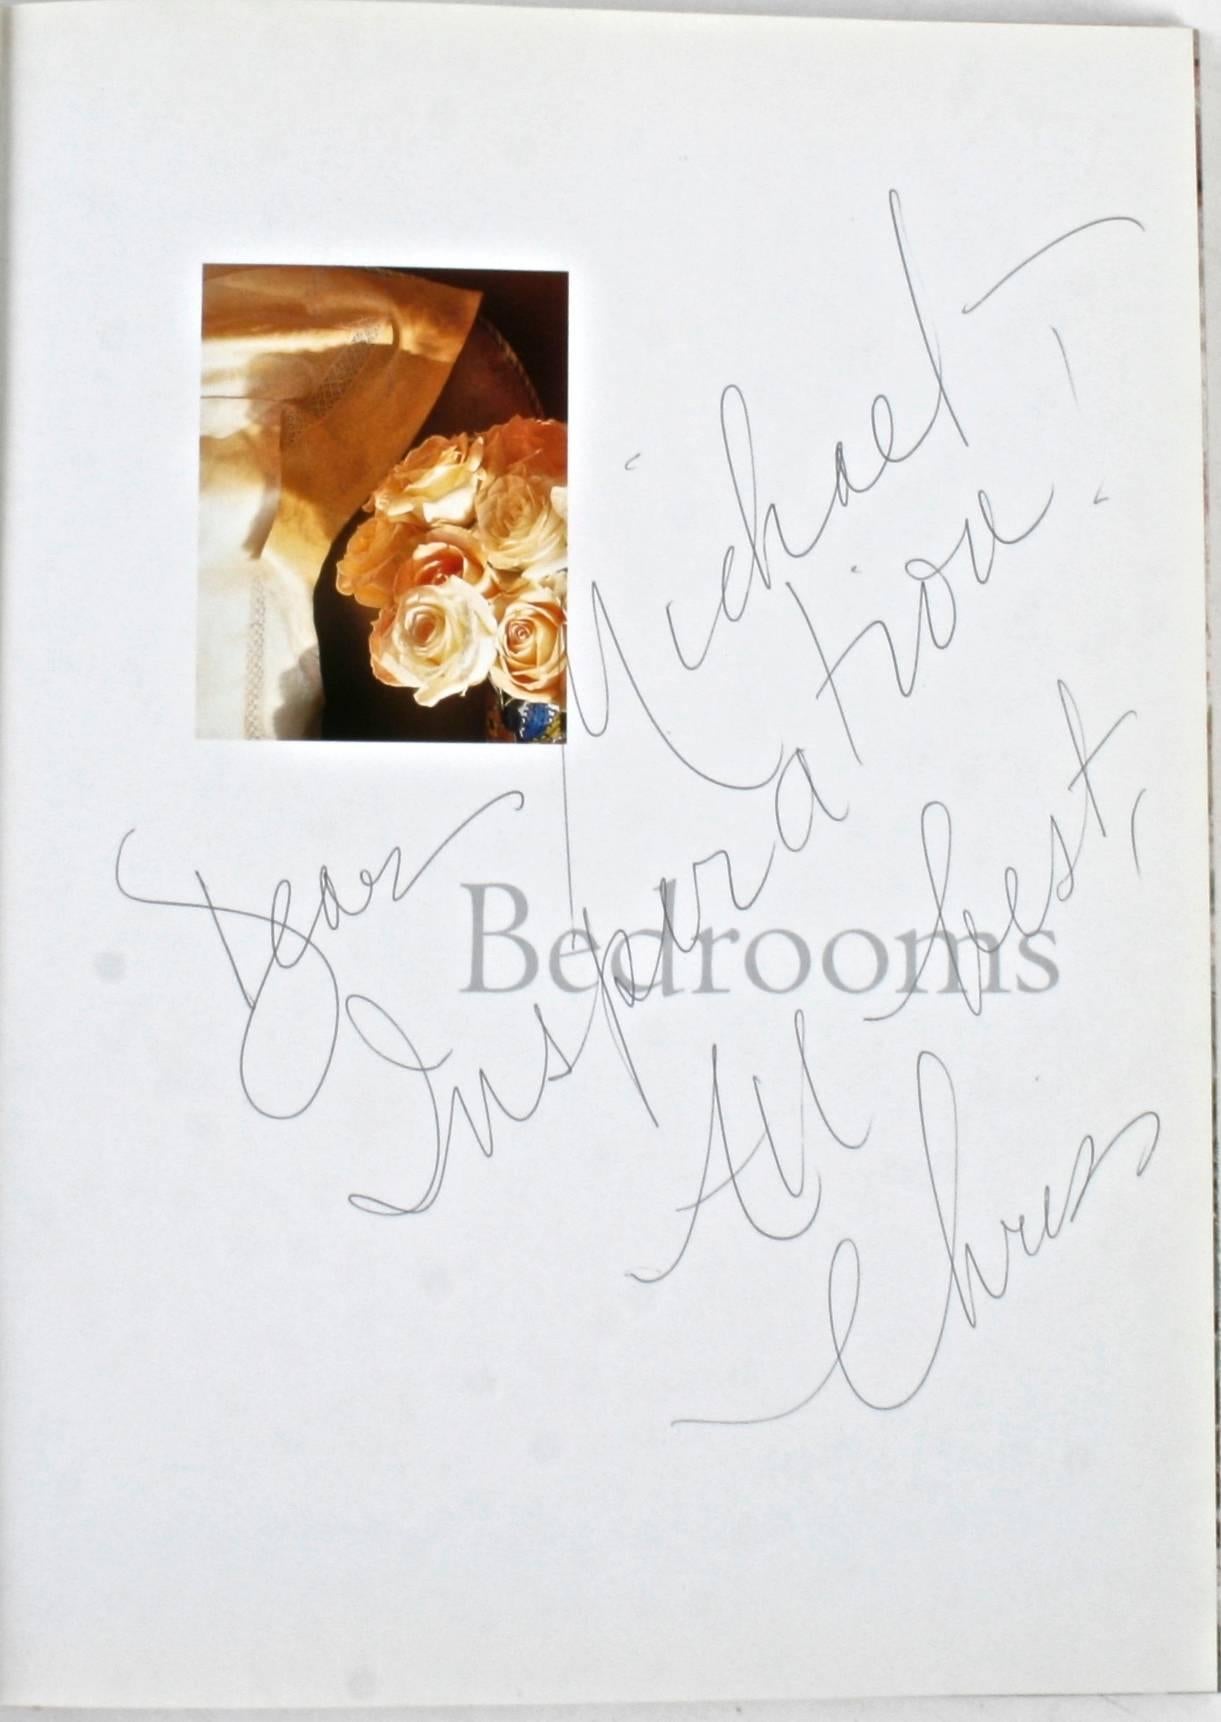 Bedrooms: Creating the Stylish, Comfortable Room of Your Dreams by Chris Casson Madden. Clarkson Potter, 2001. Signed and inscribed, stated first edition hardcover with dust jacket. 